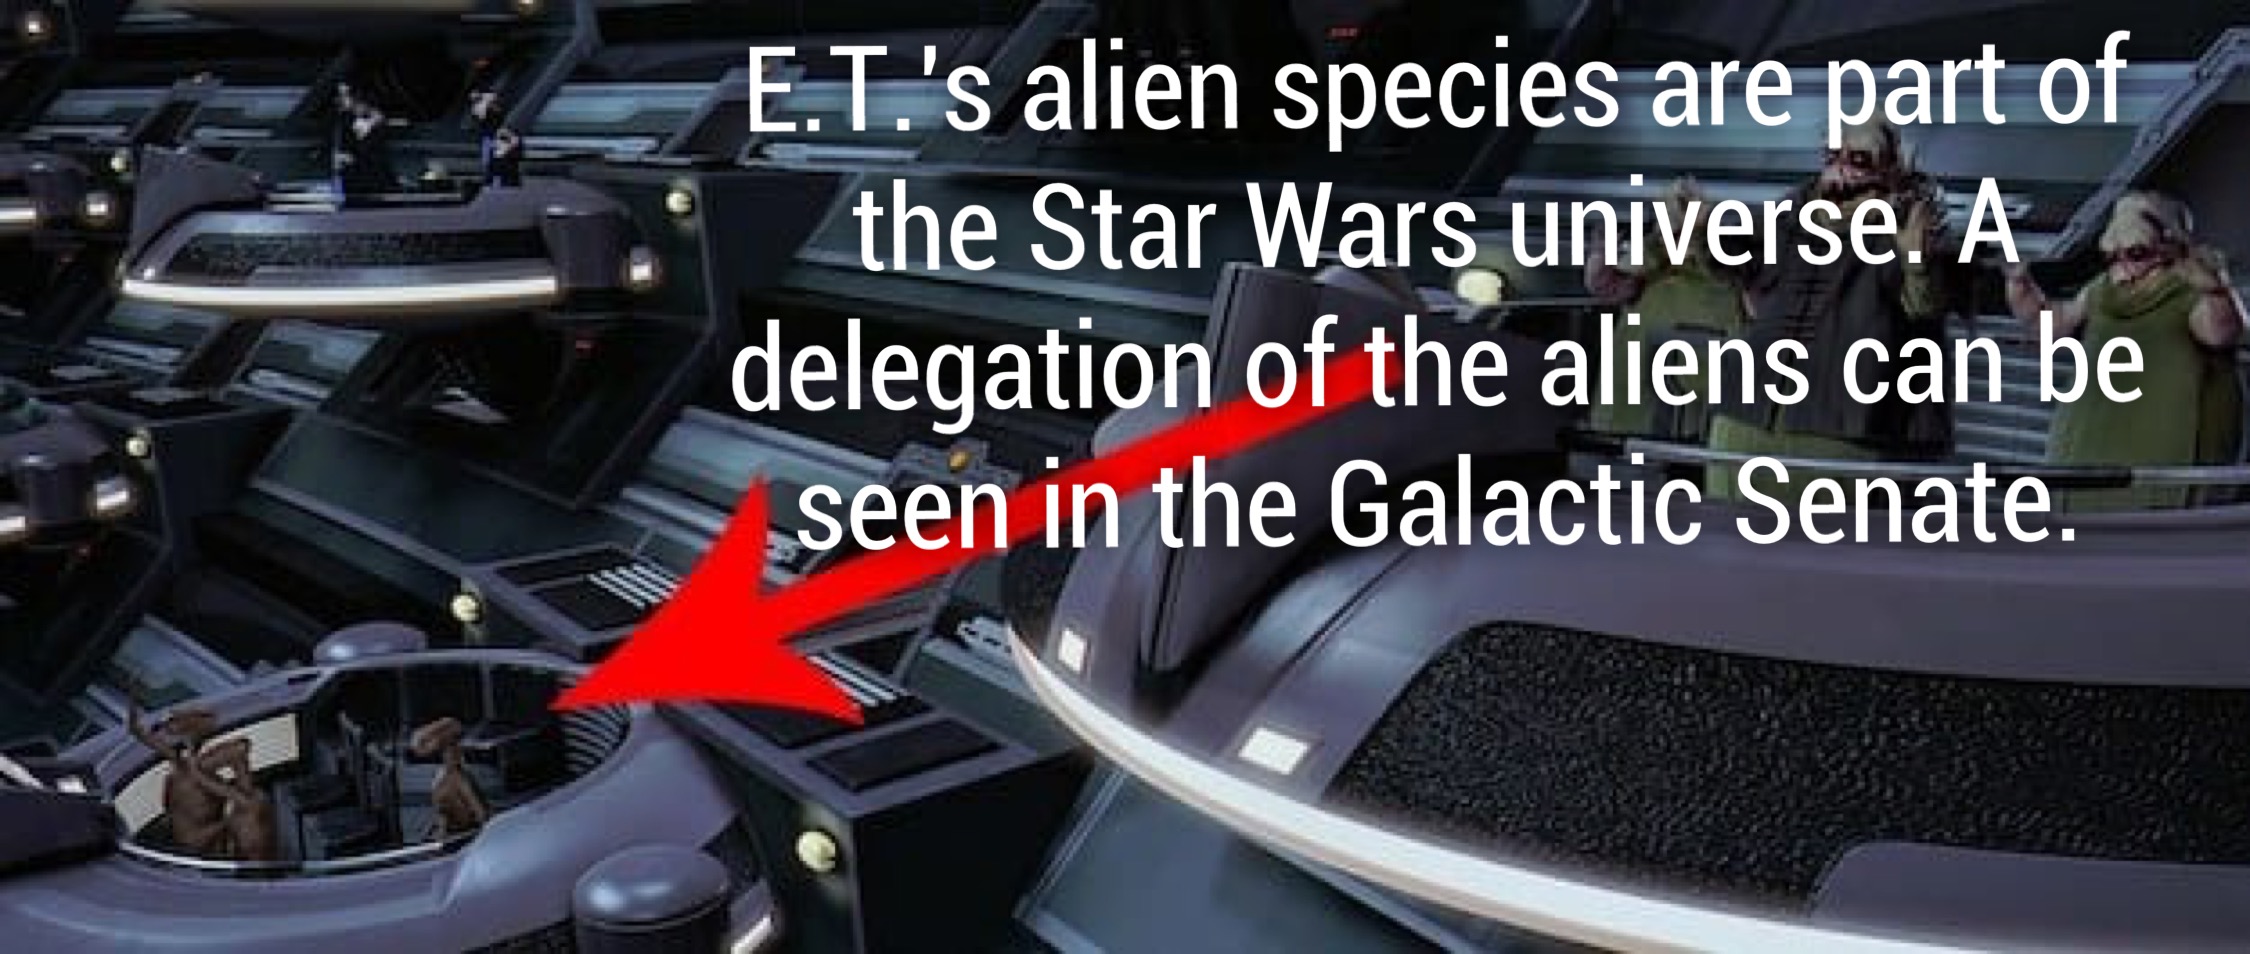 star wars et - E.T.'s alien species are part of the Star Wars universe. A delegation of the aliens can be seen in the Galactic Senate.